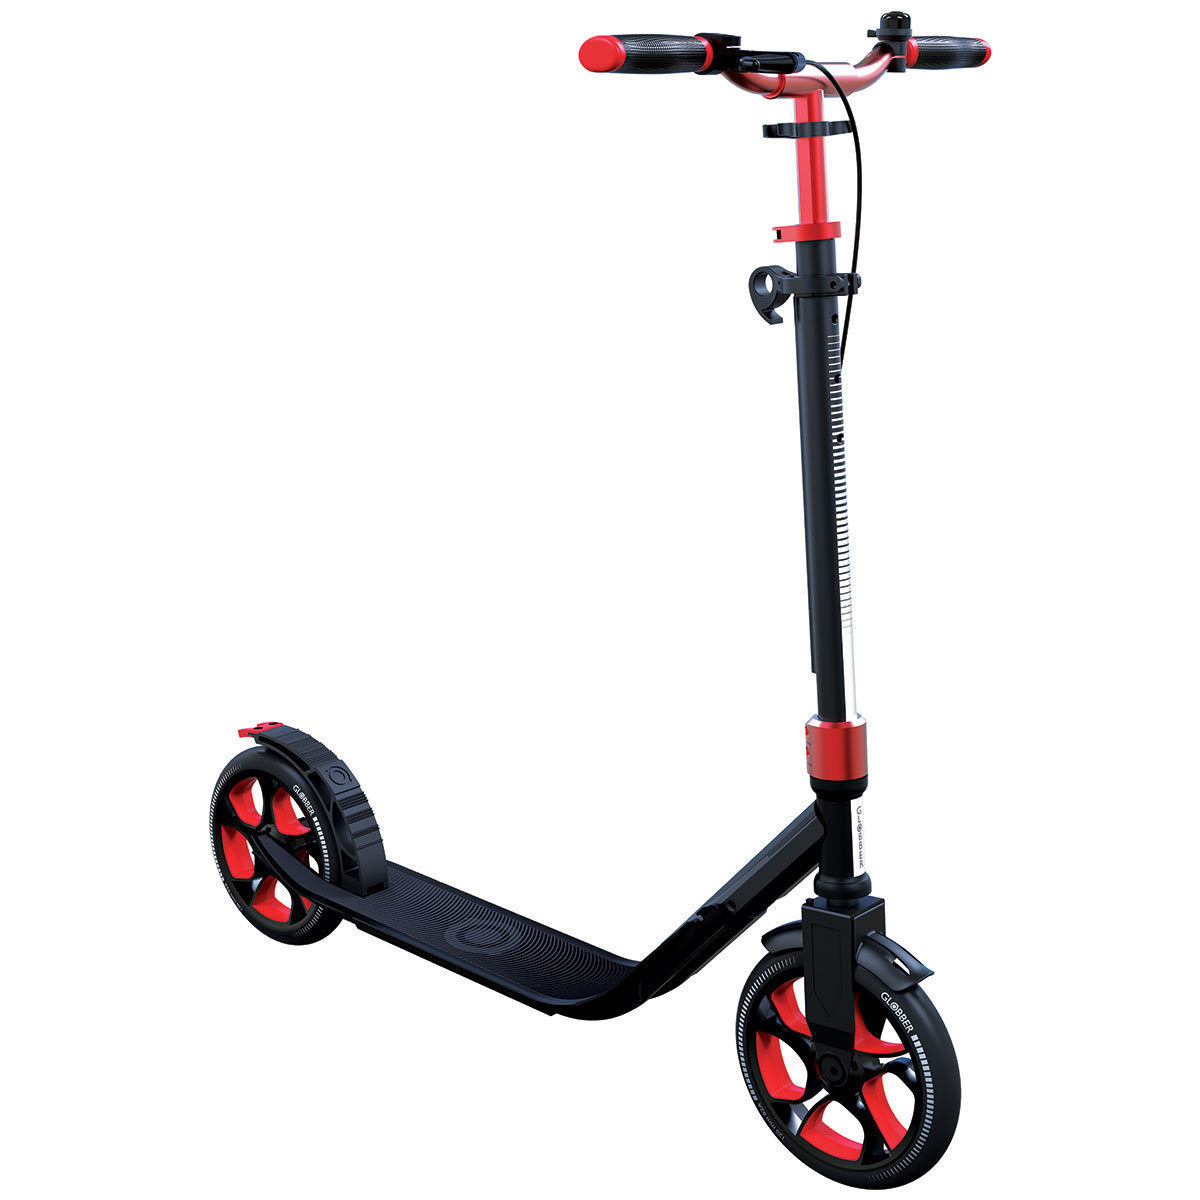 Globber One NL 230 Ultimate Adult Scooter in 3 Colours